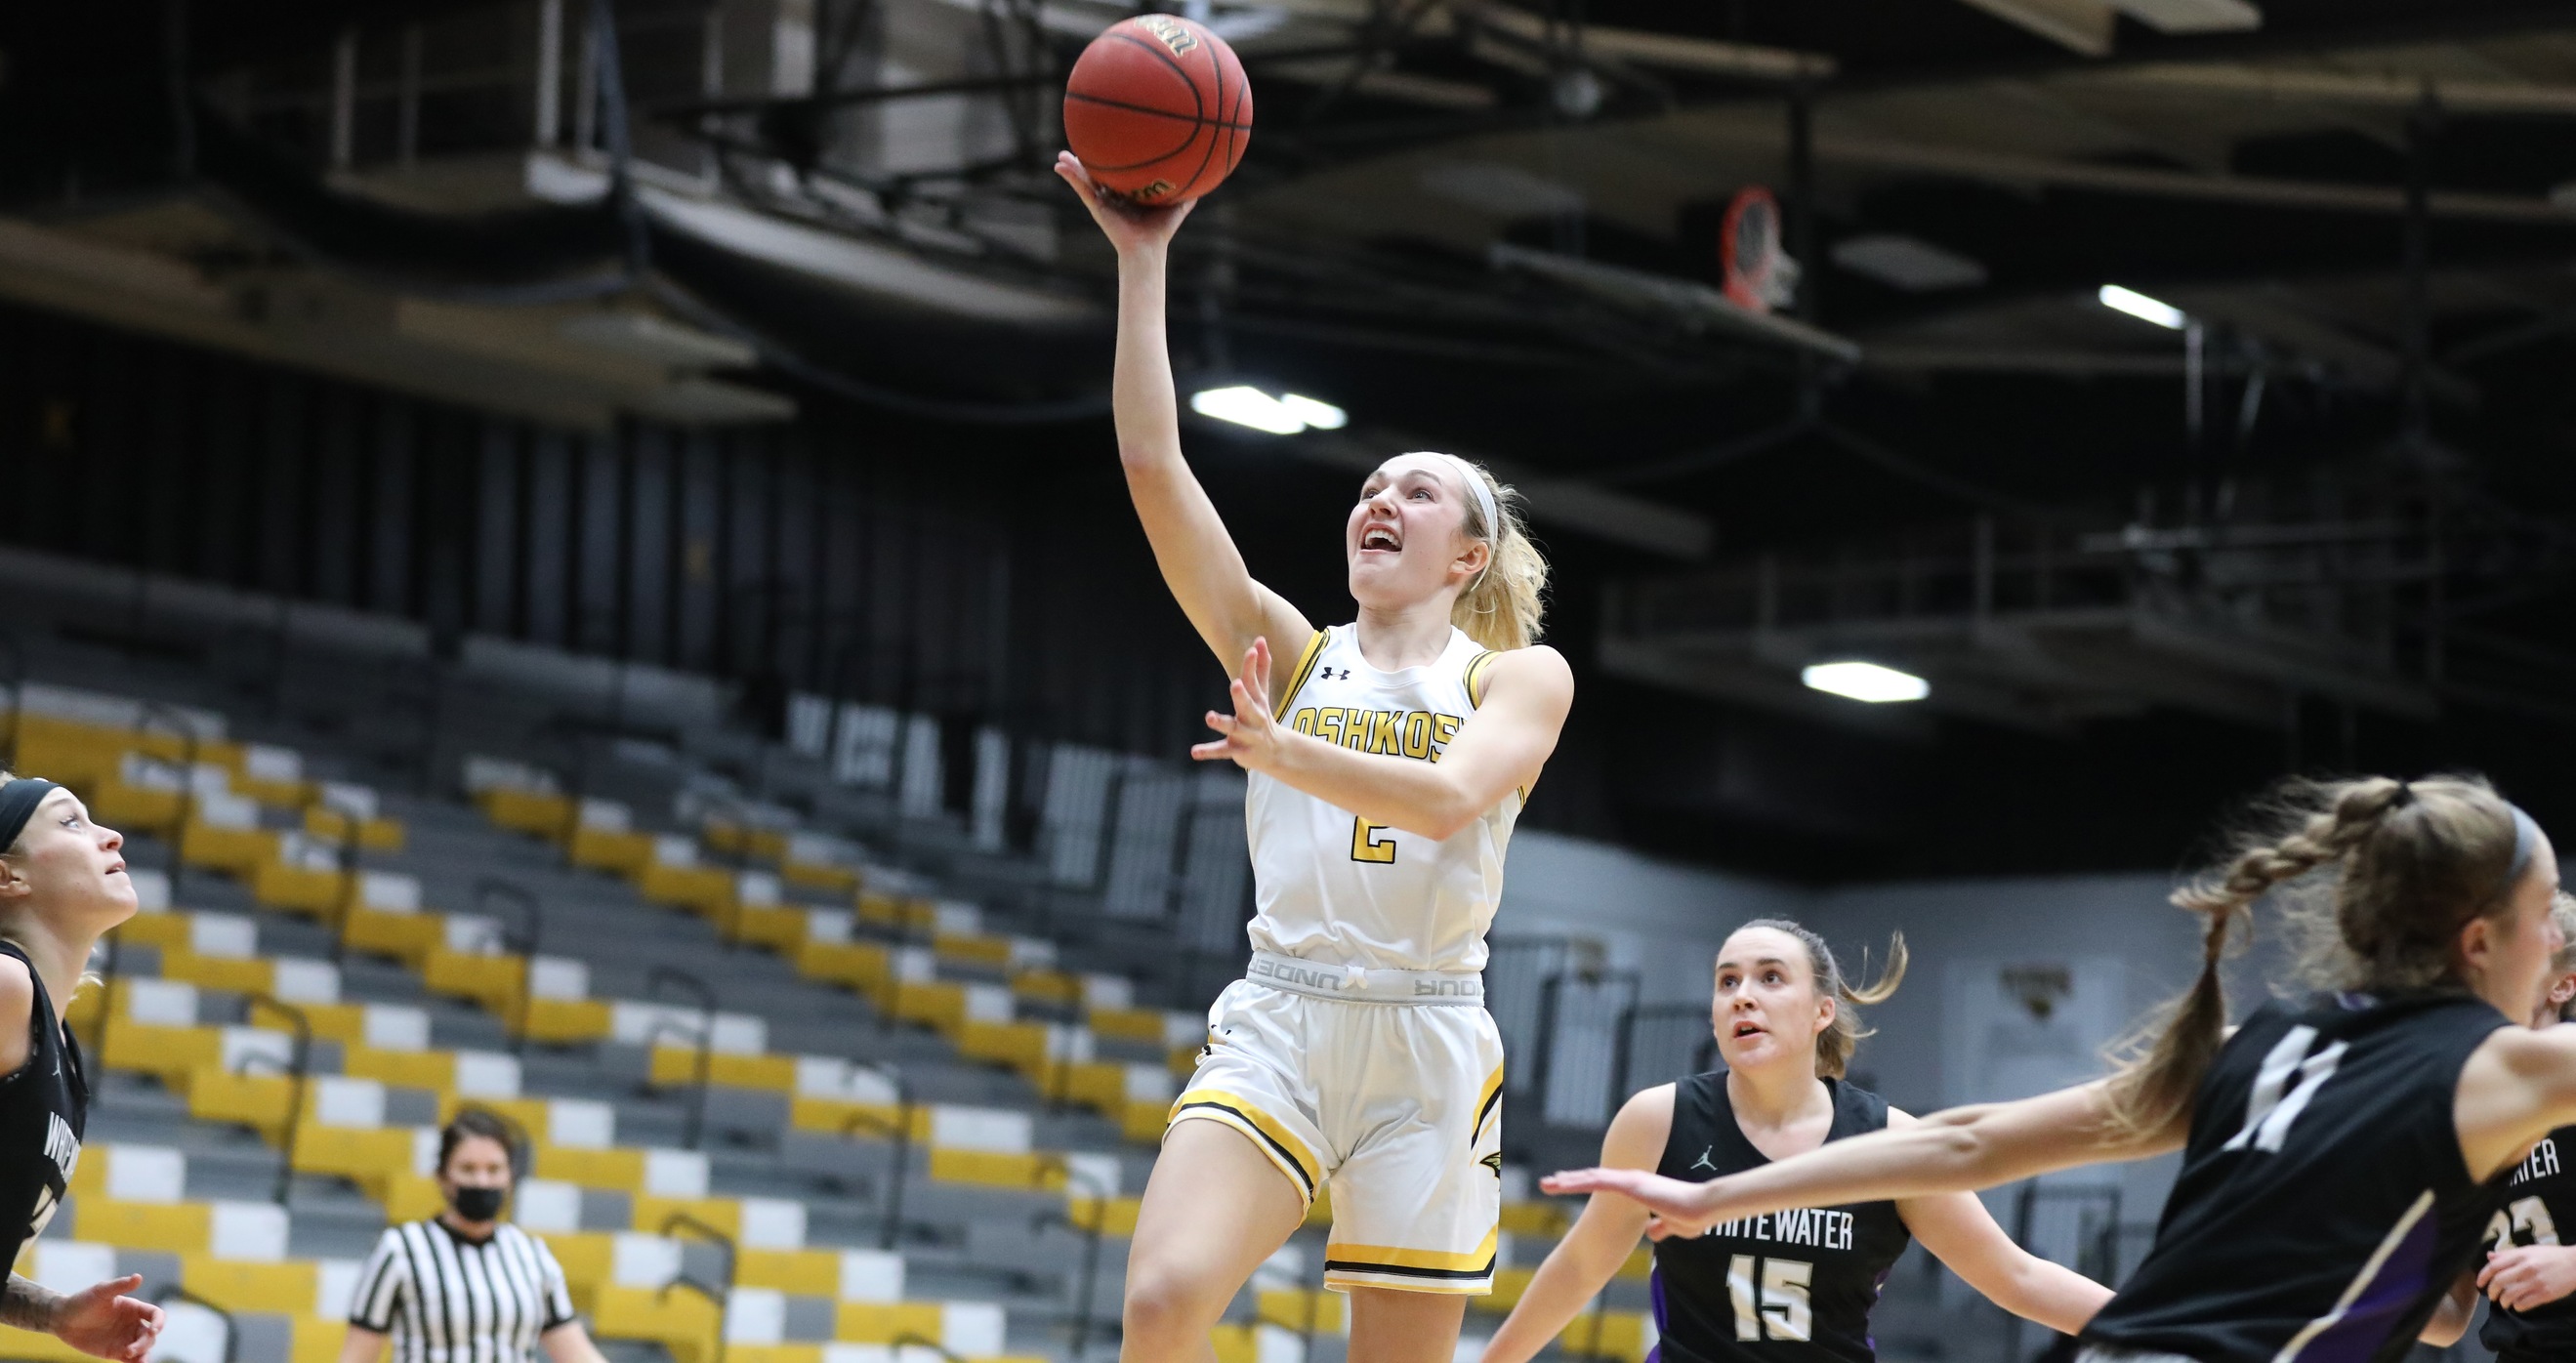 Abby Kaiser matched her career with 14 points while pacing the Titans with six rebounds and four steals against the Warhawks.